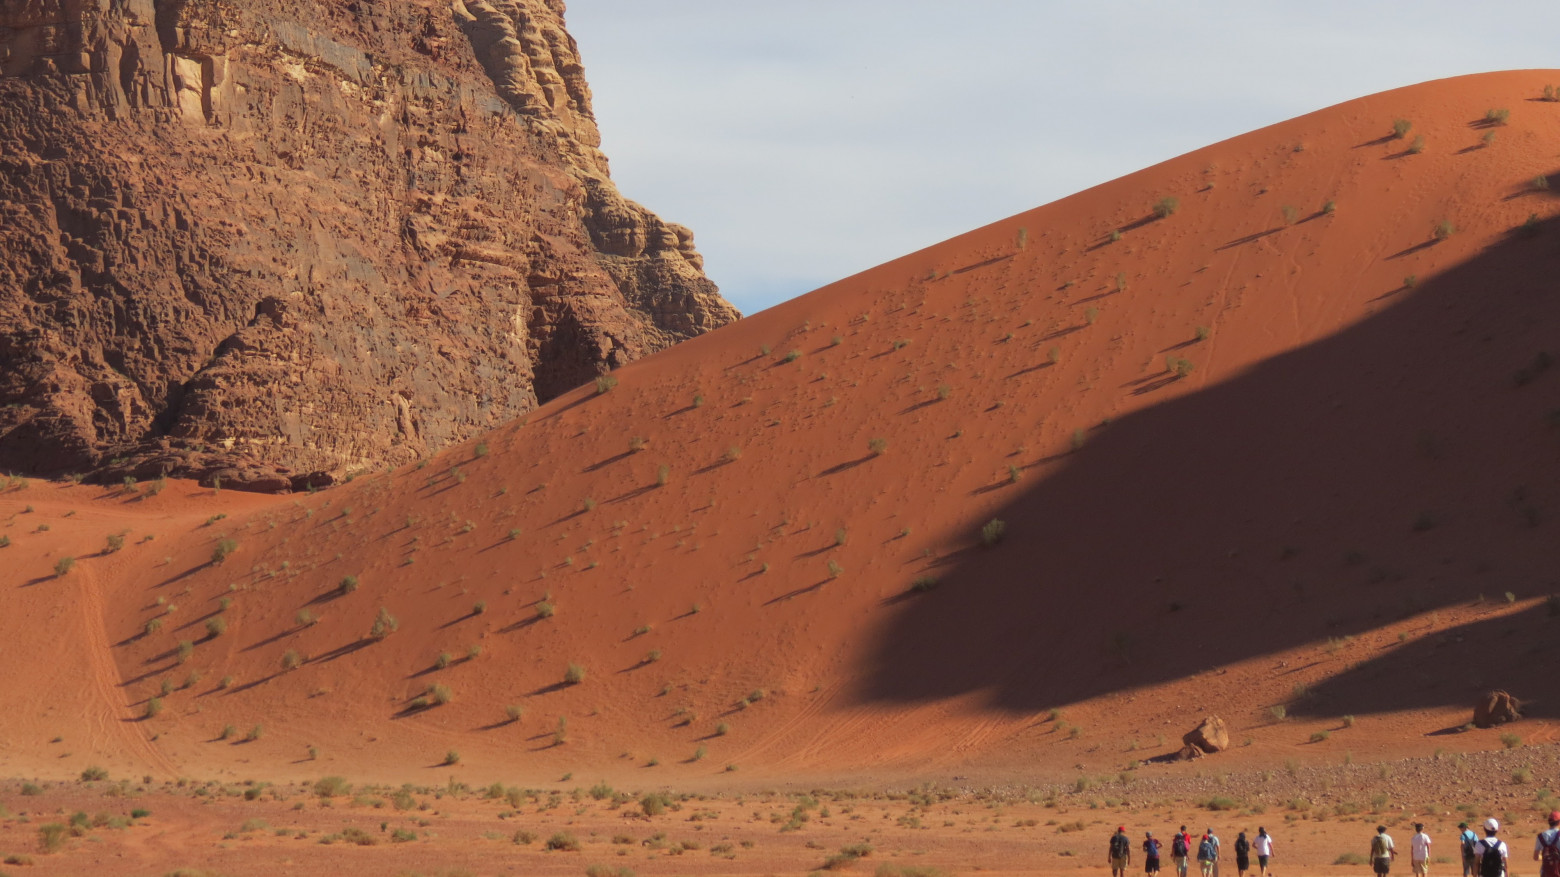 A amber sand dune towers over the tiny figures of a group of people.